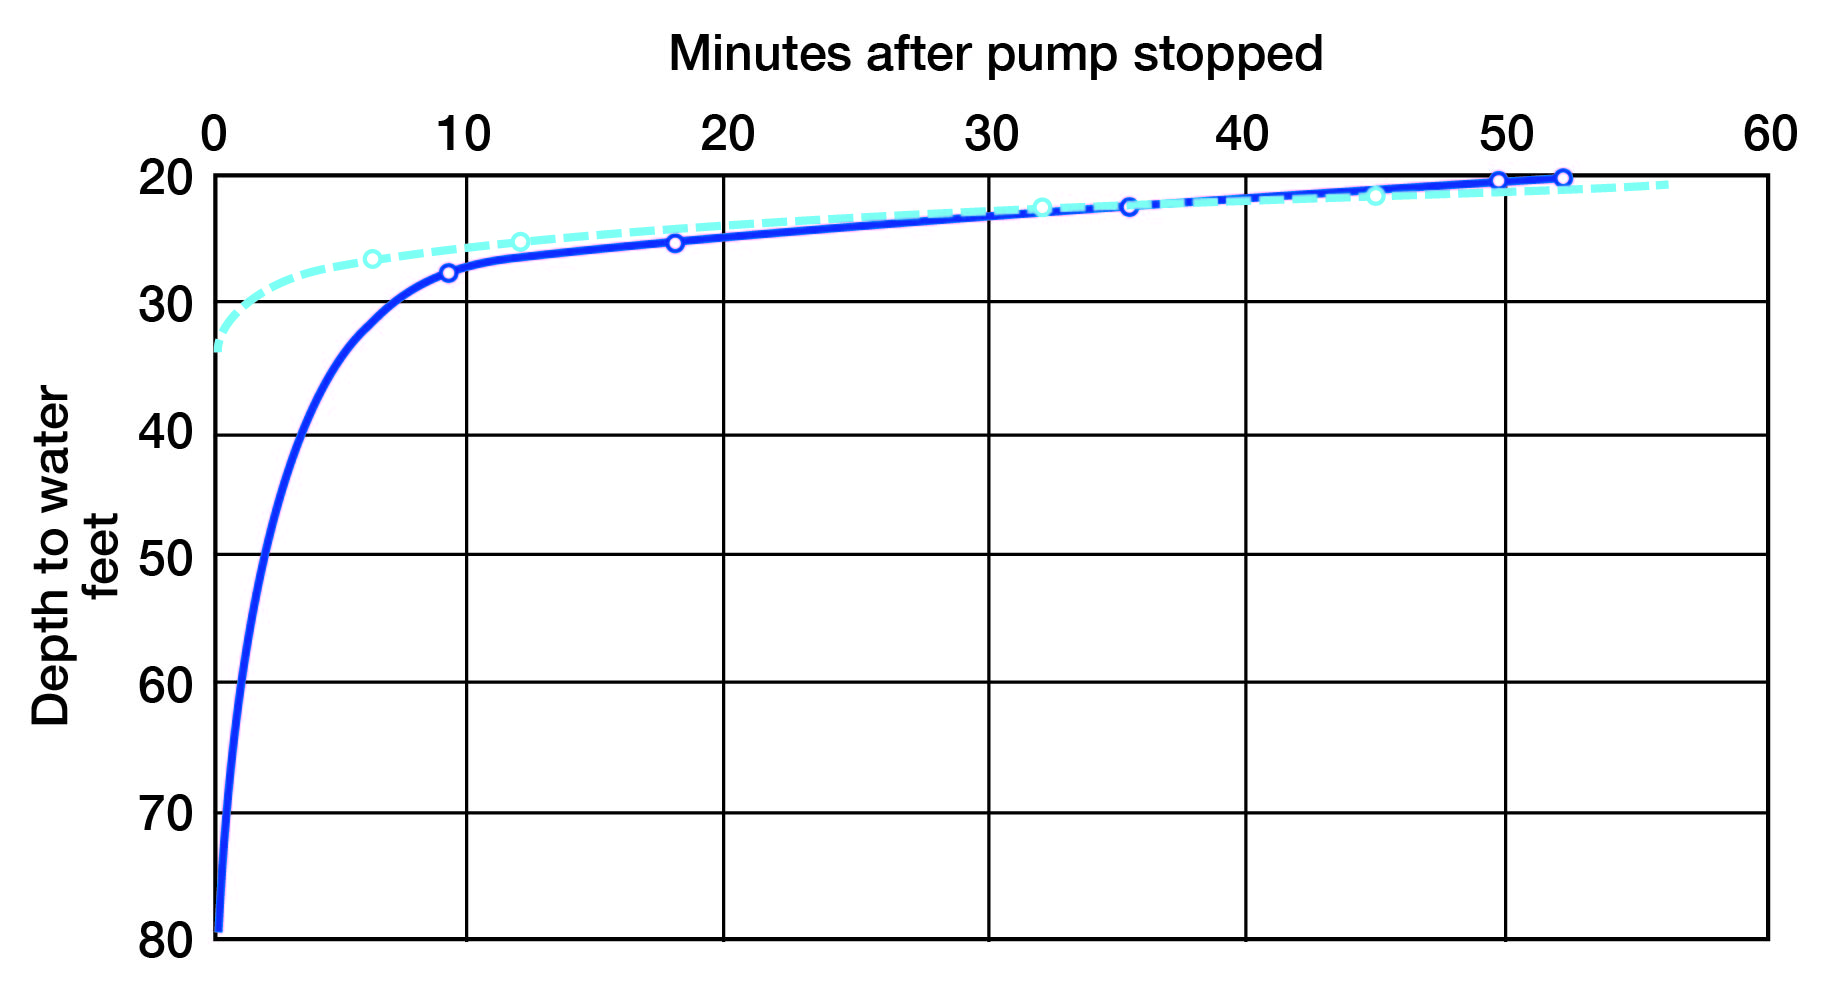 Nearby unpumped well has level affected by pumping well.